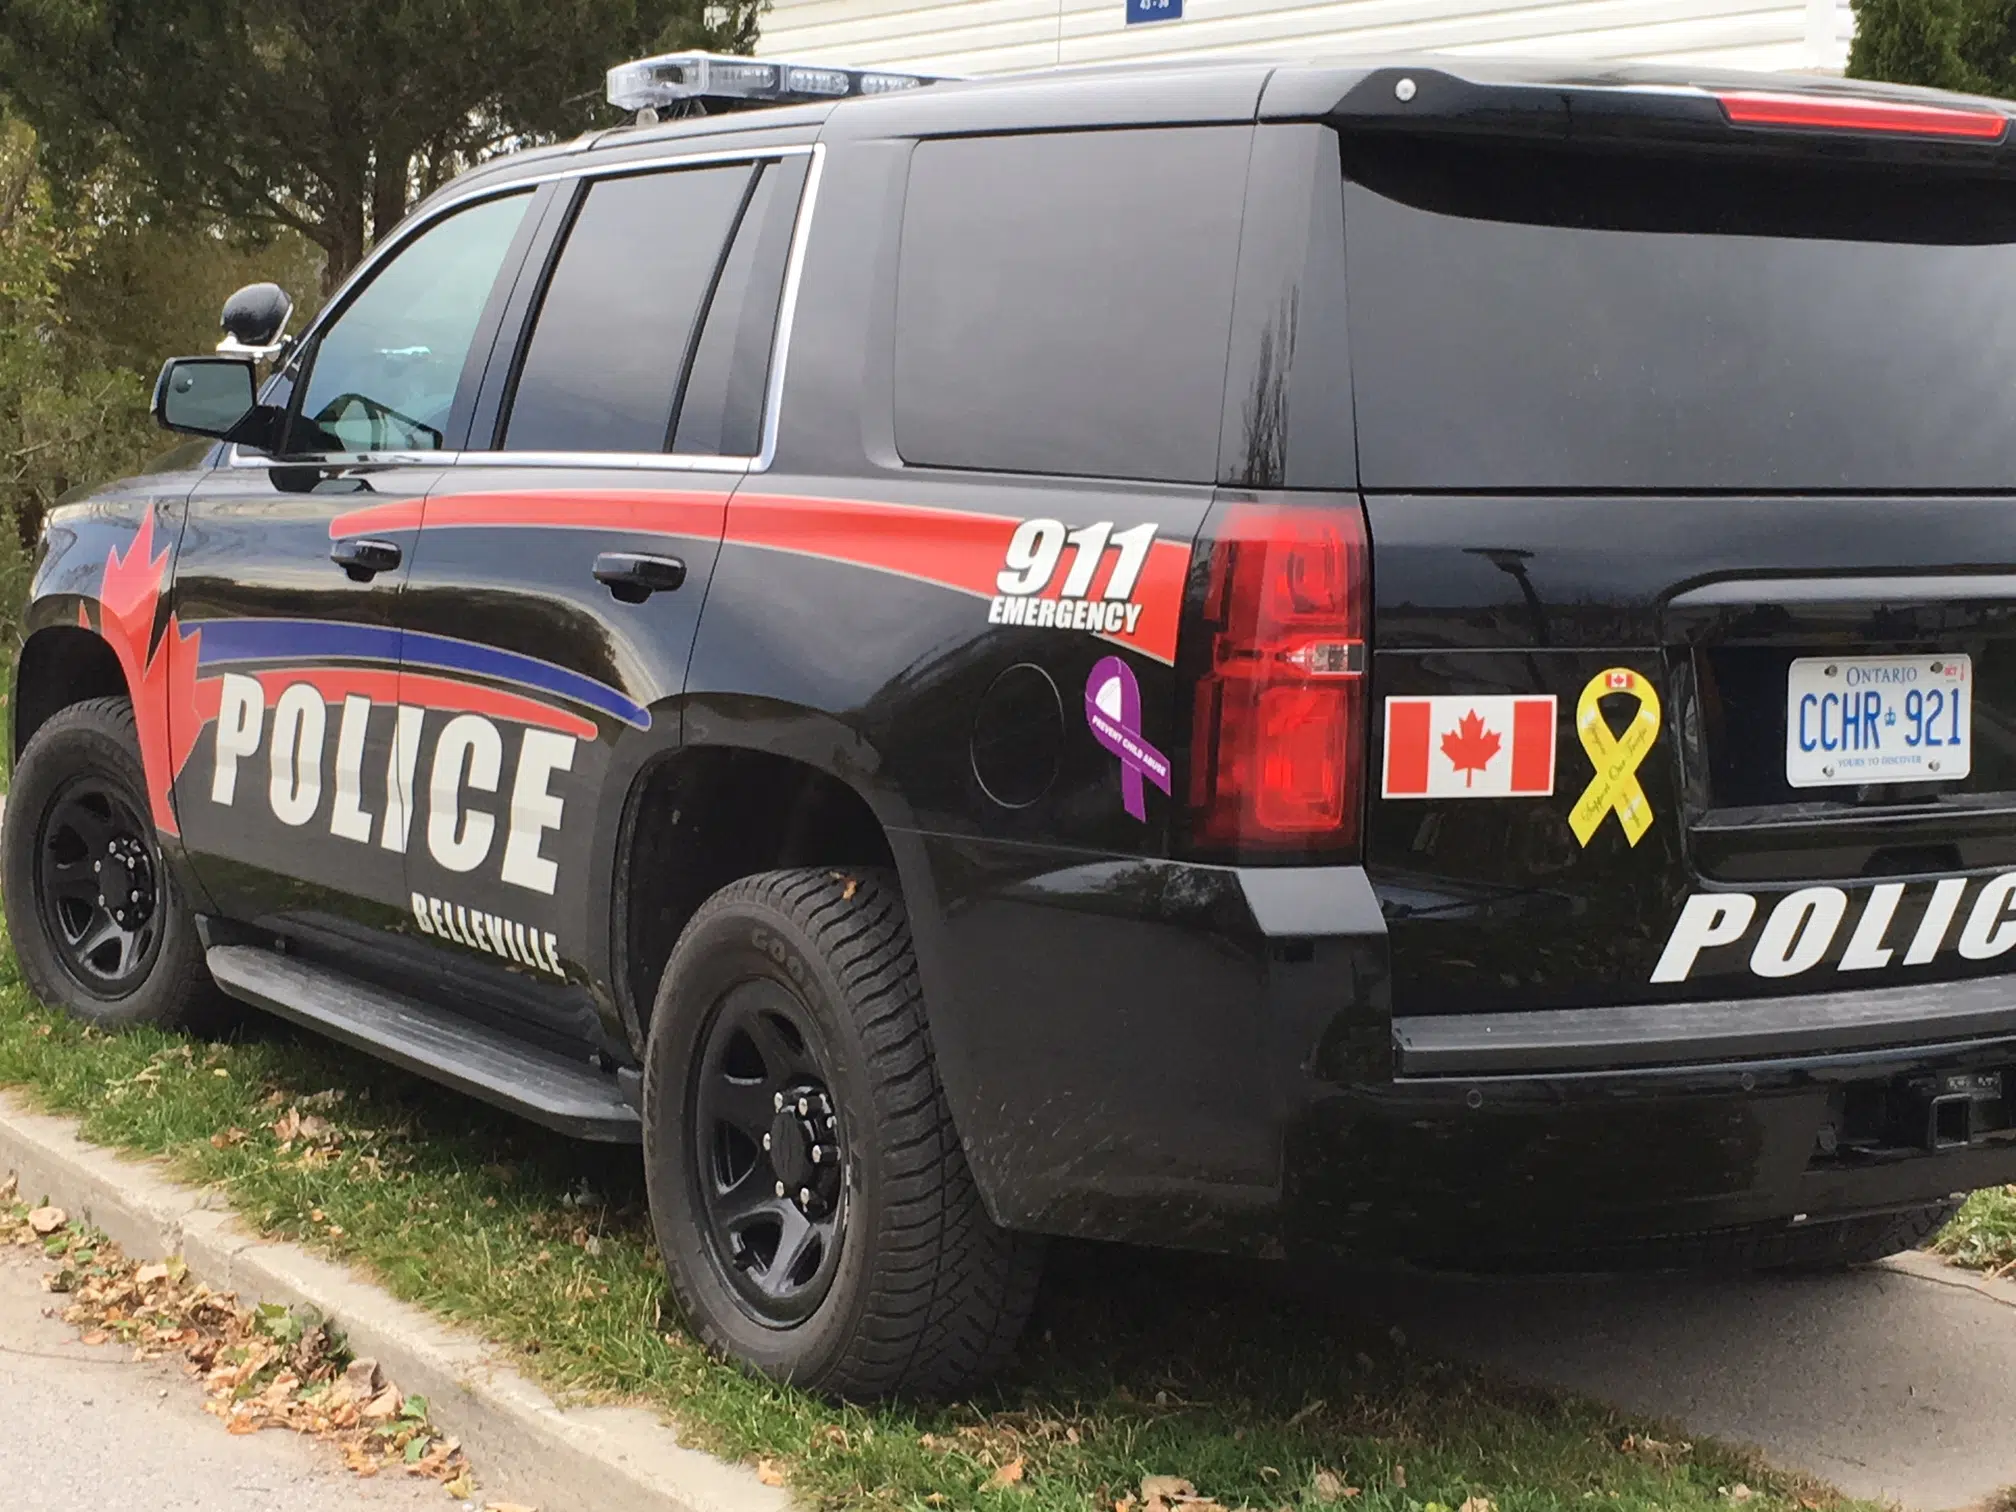 Accomplishments many for Belleville police officers